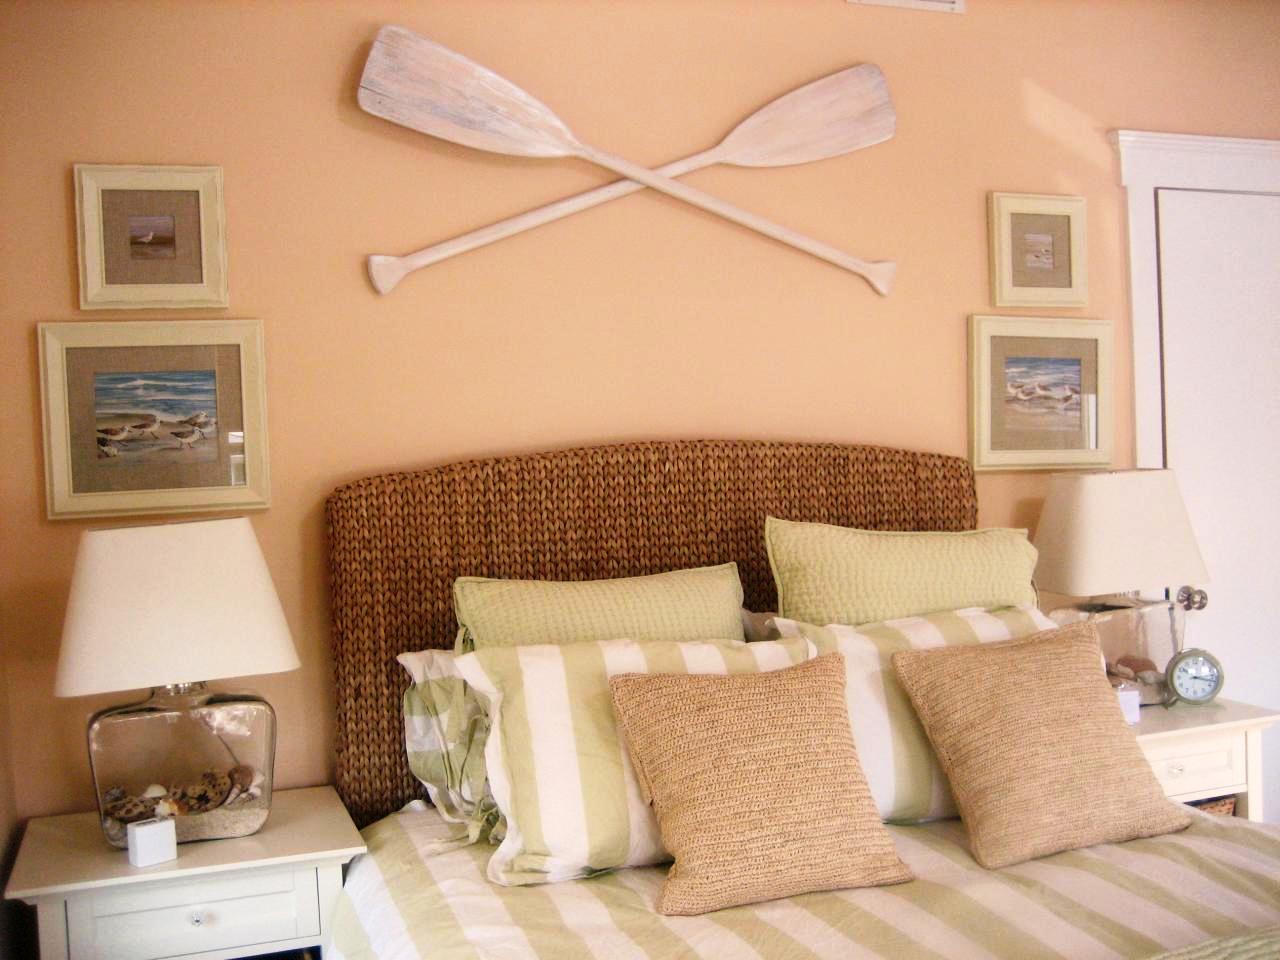 43-Pastel Colored Bedroom